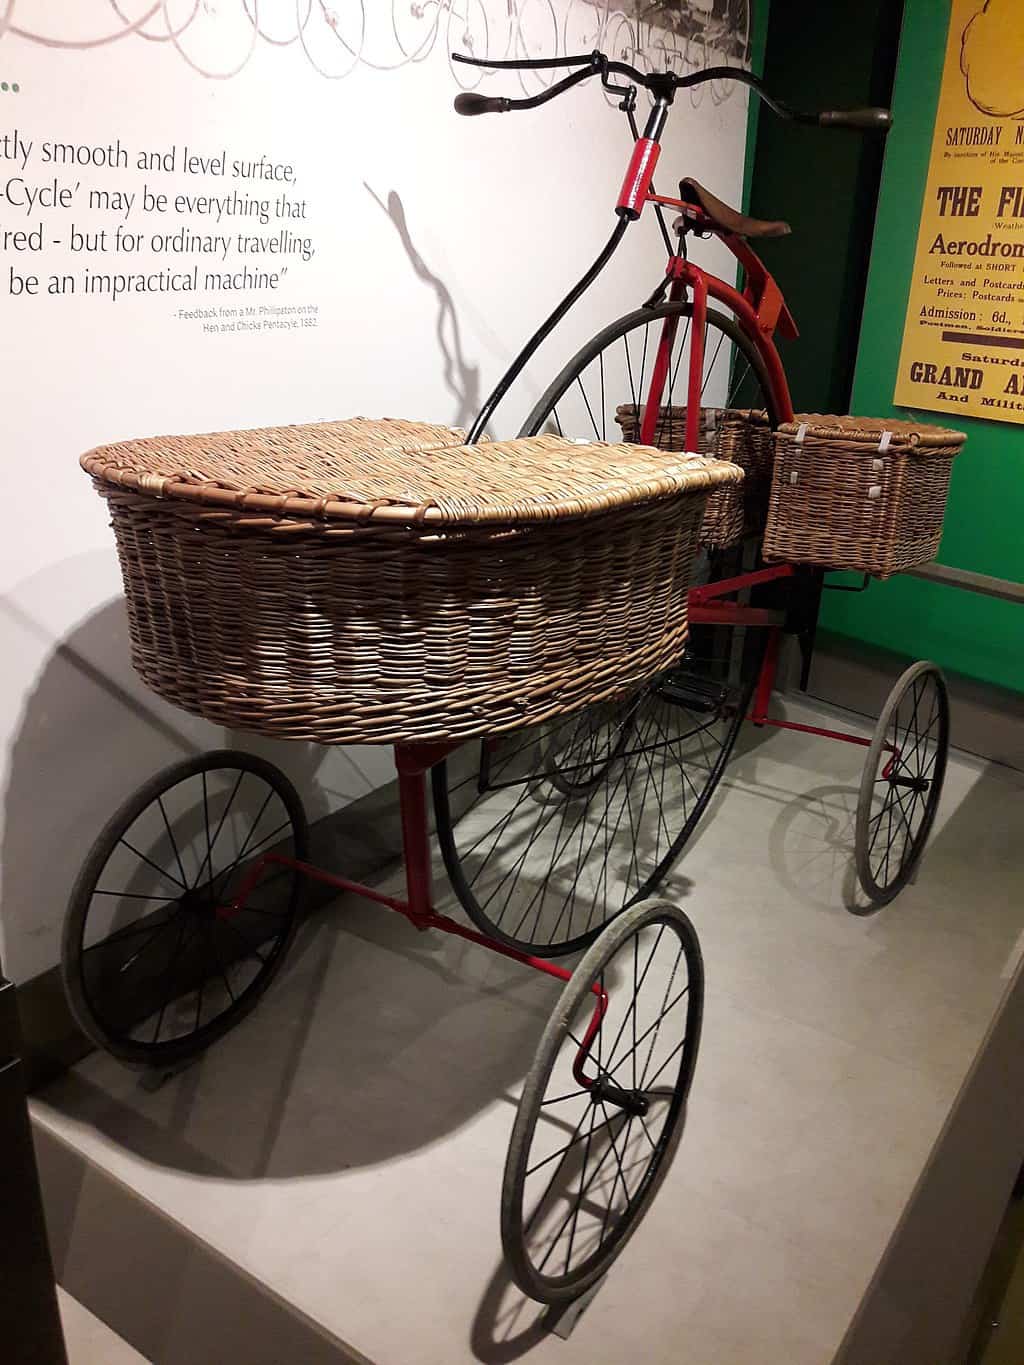 Pentacycle in London Postal Museum with wicker baskets on front and back